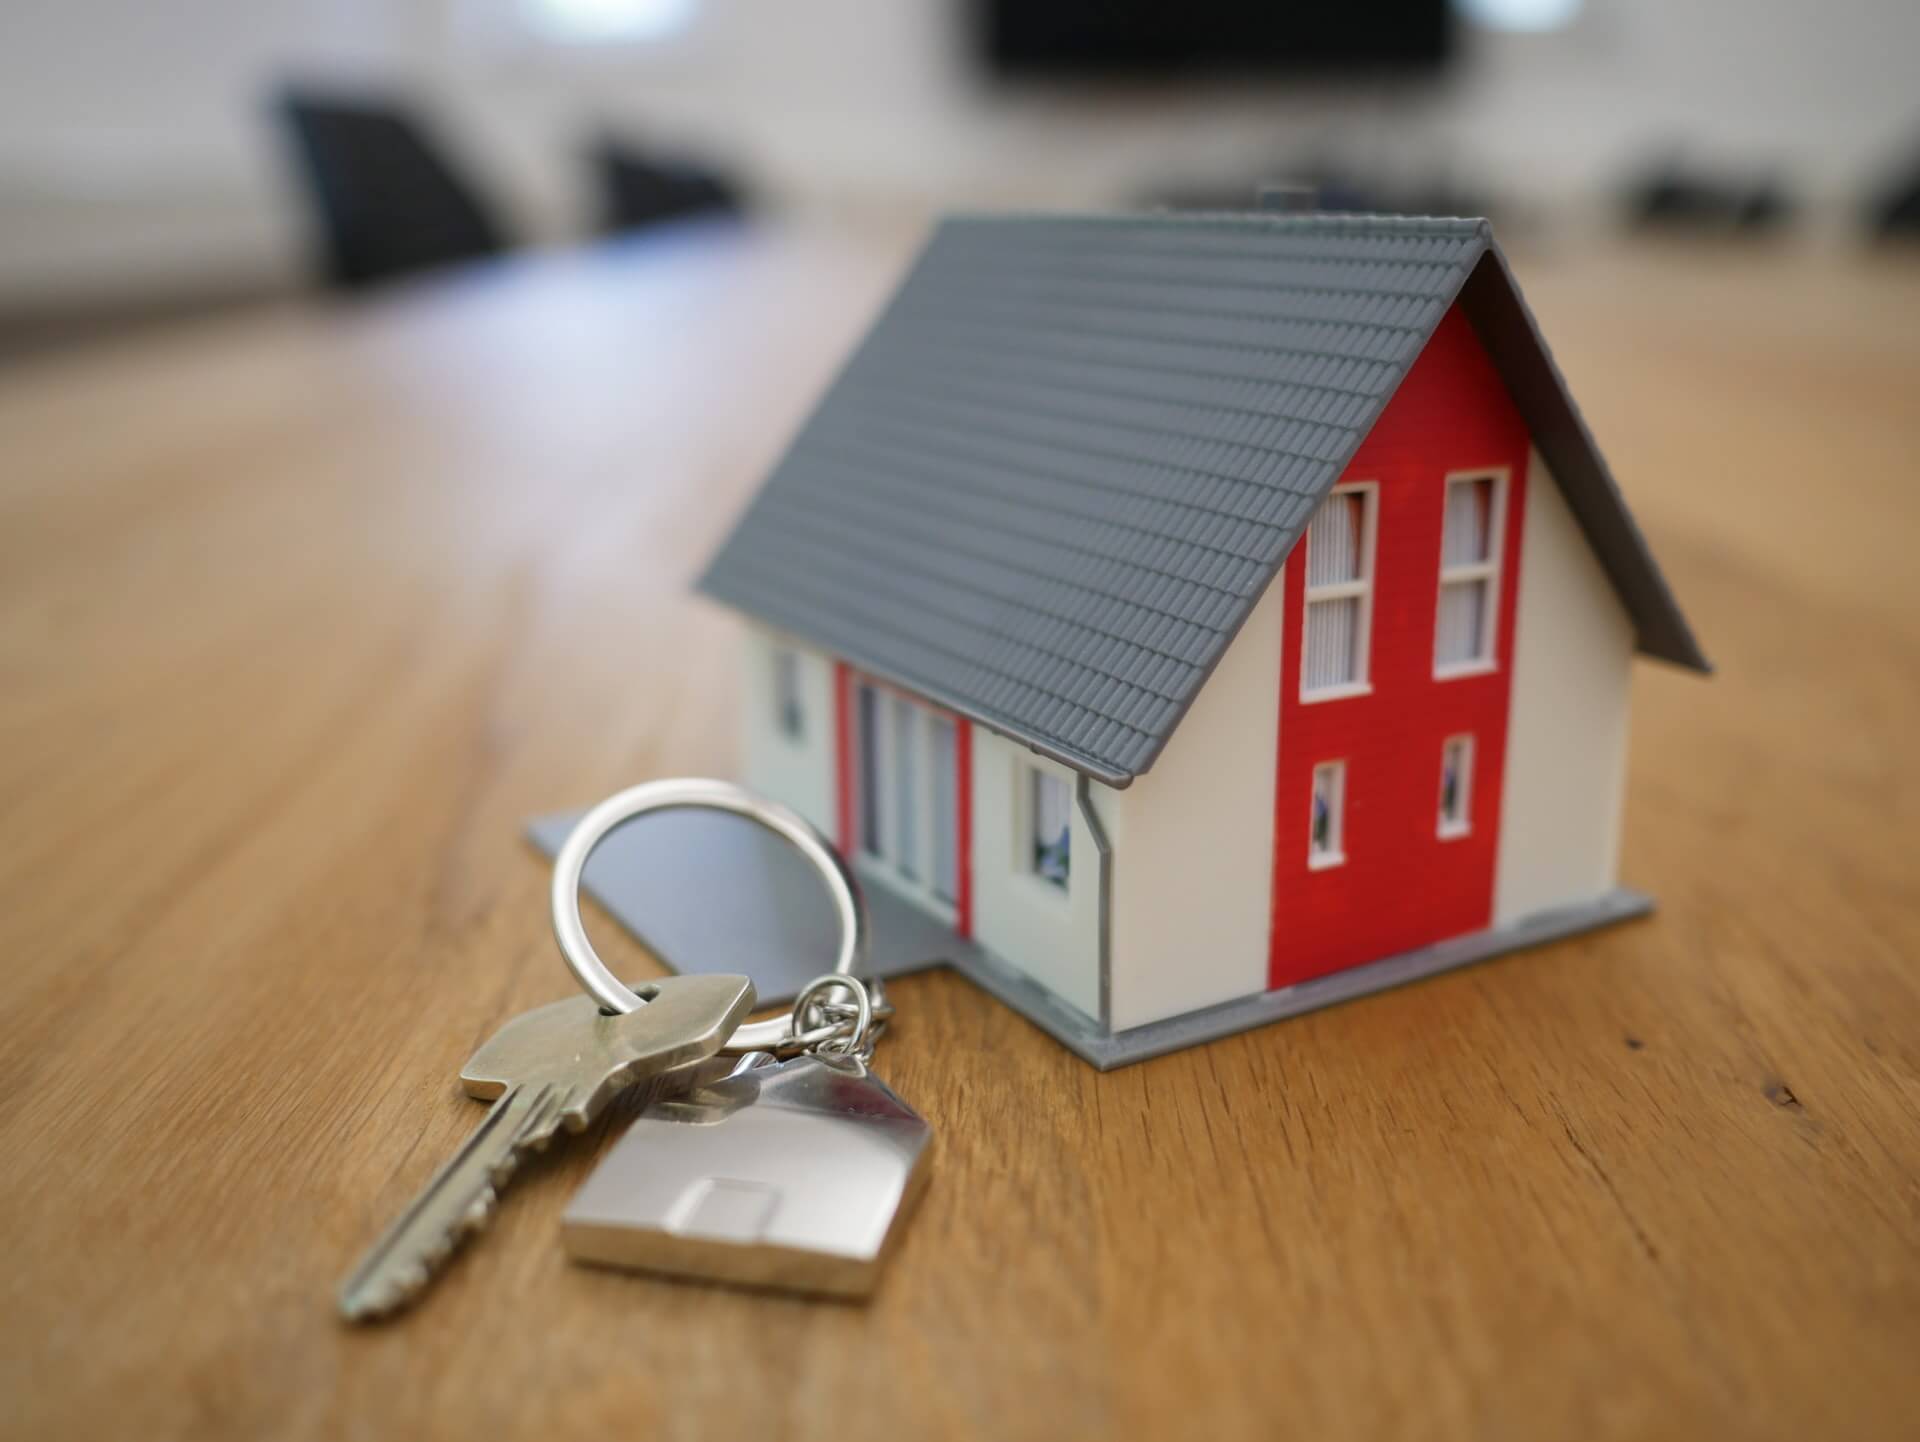 small model house with keys on a ring beside